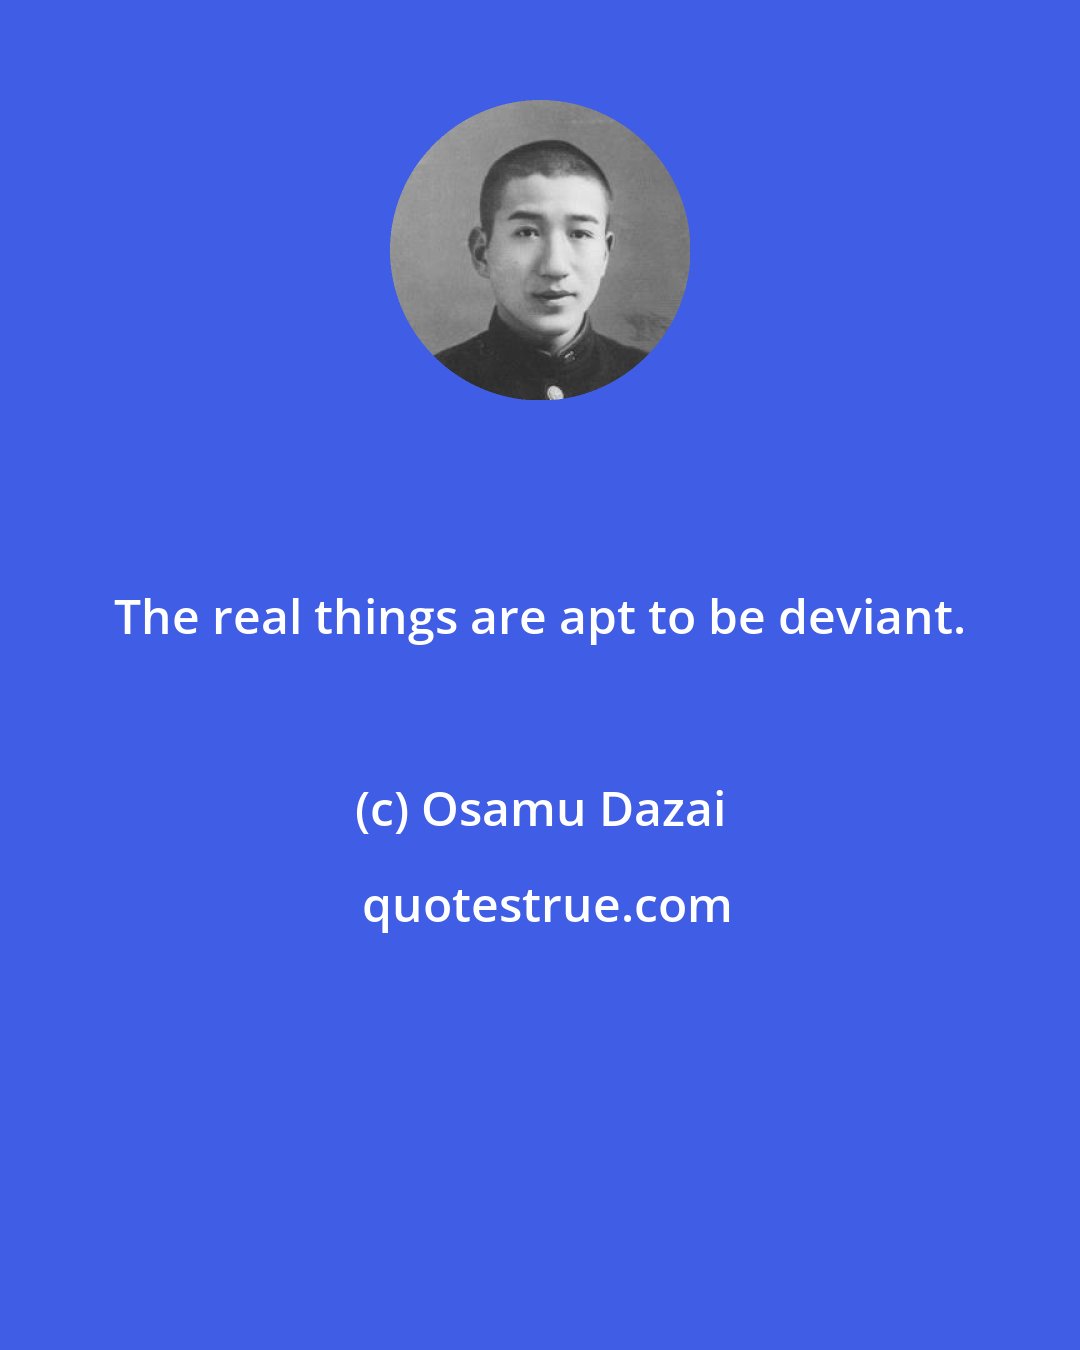 Osamu Dazai: The real things are apt to be deviant.